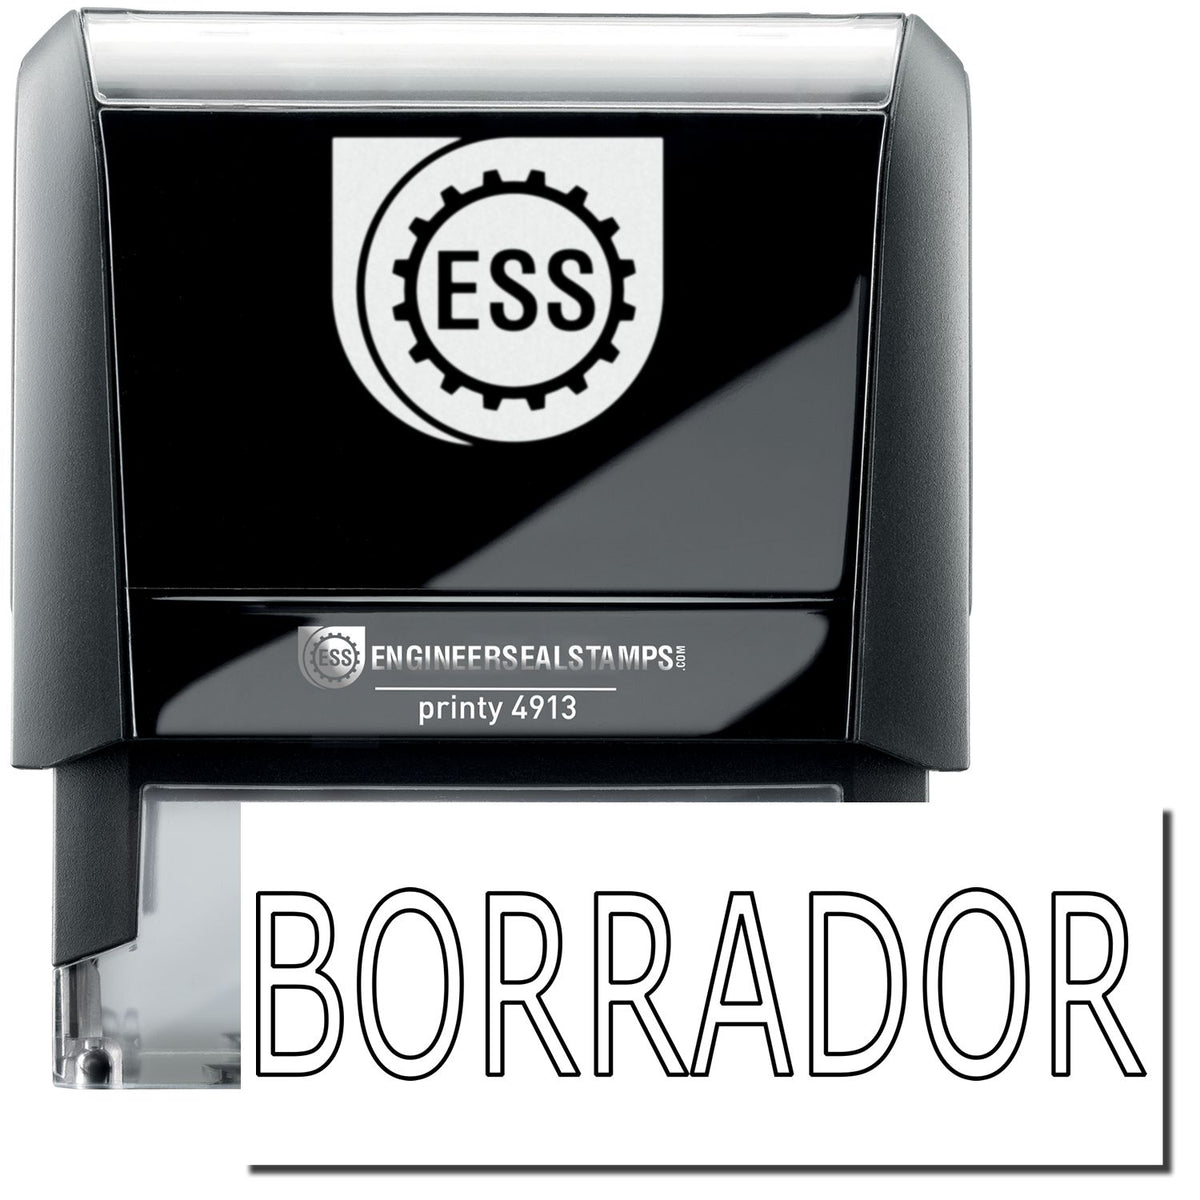 A self-inking stamp with a stamped image showing how the text &quot;BORRADOR&quot; in a large outline style is displayed by it after stamping.